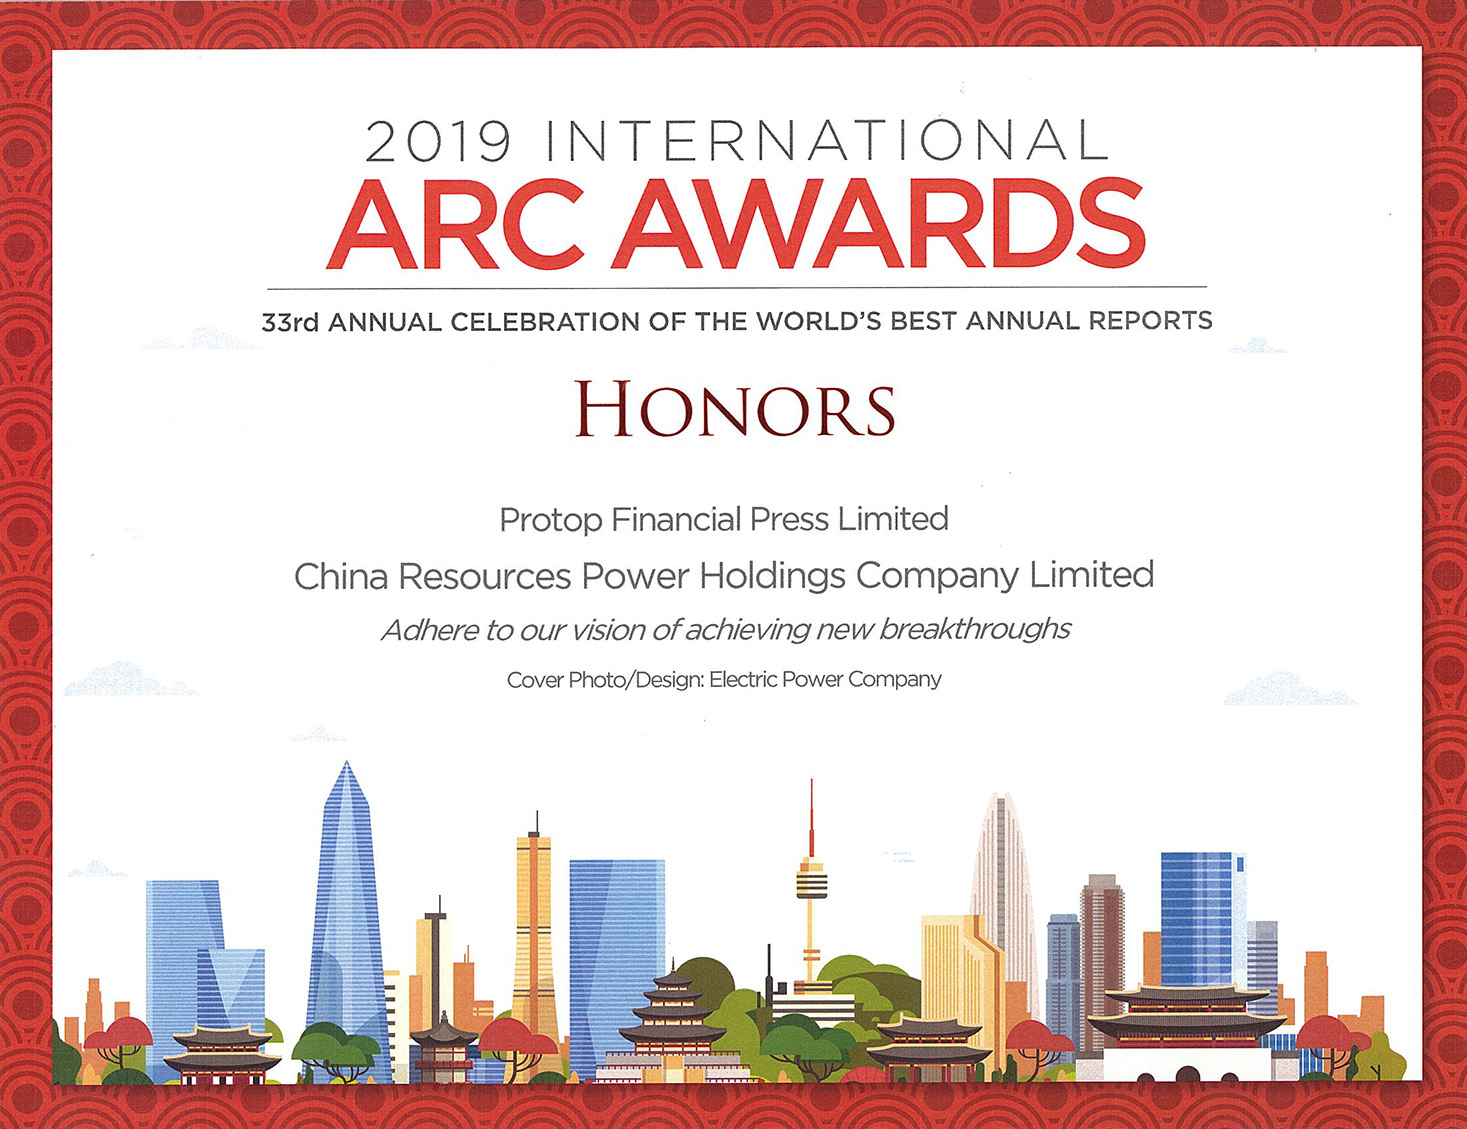 China Resources Power Holdings Company Limited – 2019 ARC AWARDS HONORS Cover Photo/Design: Electric Power Company